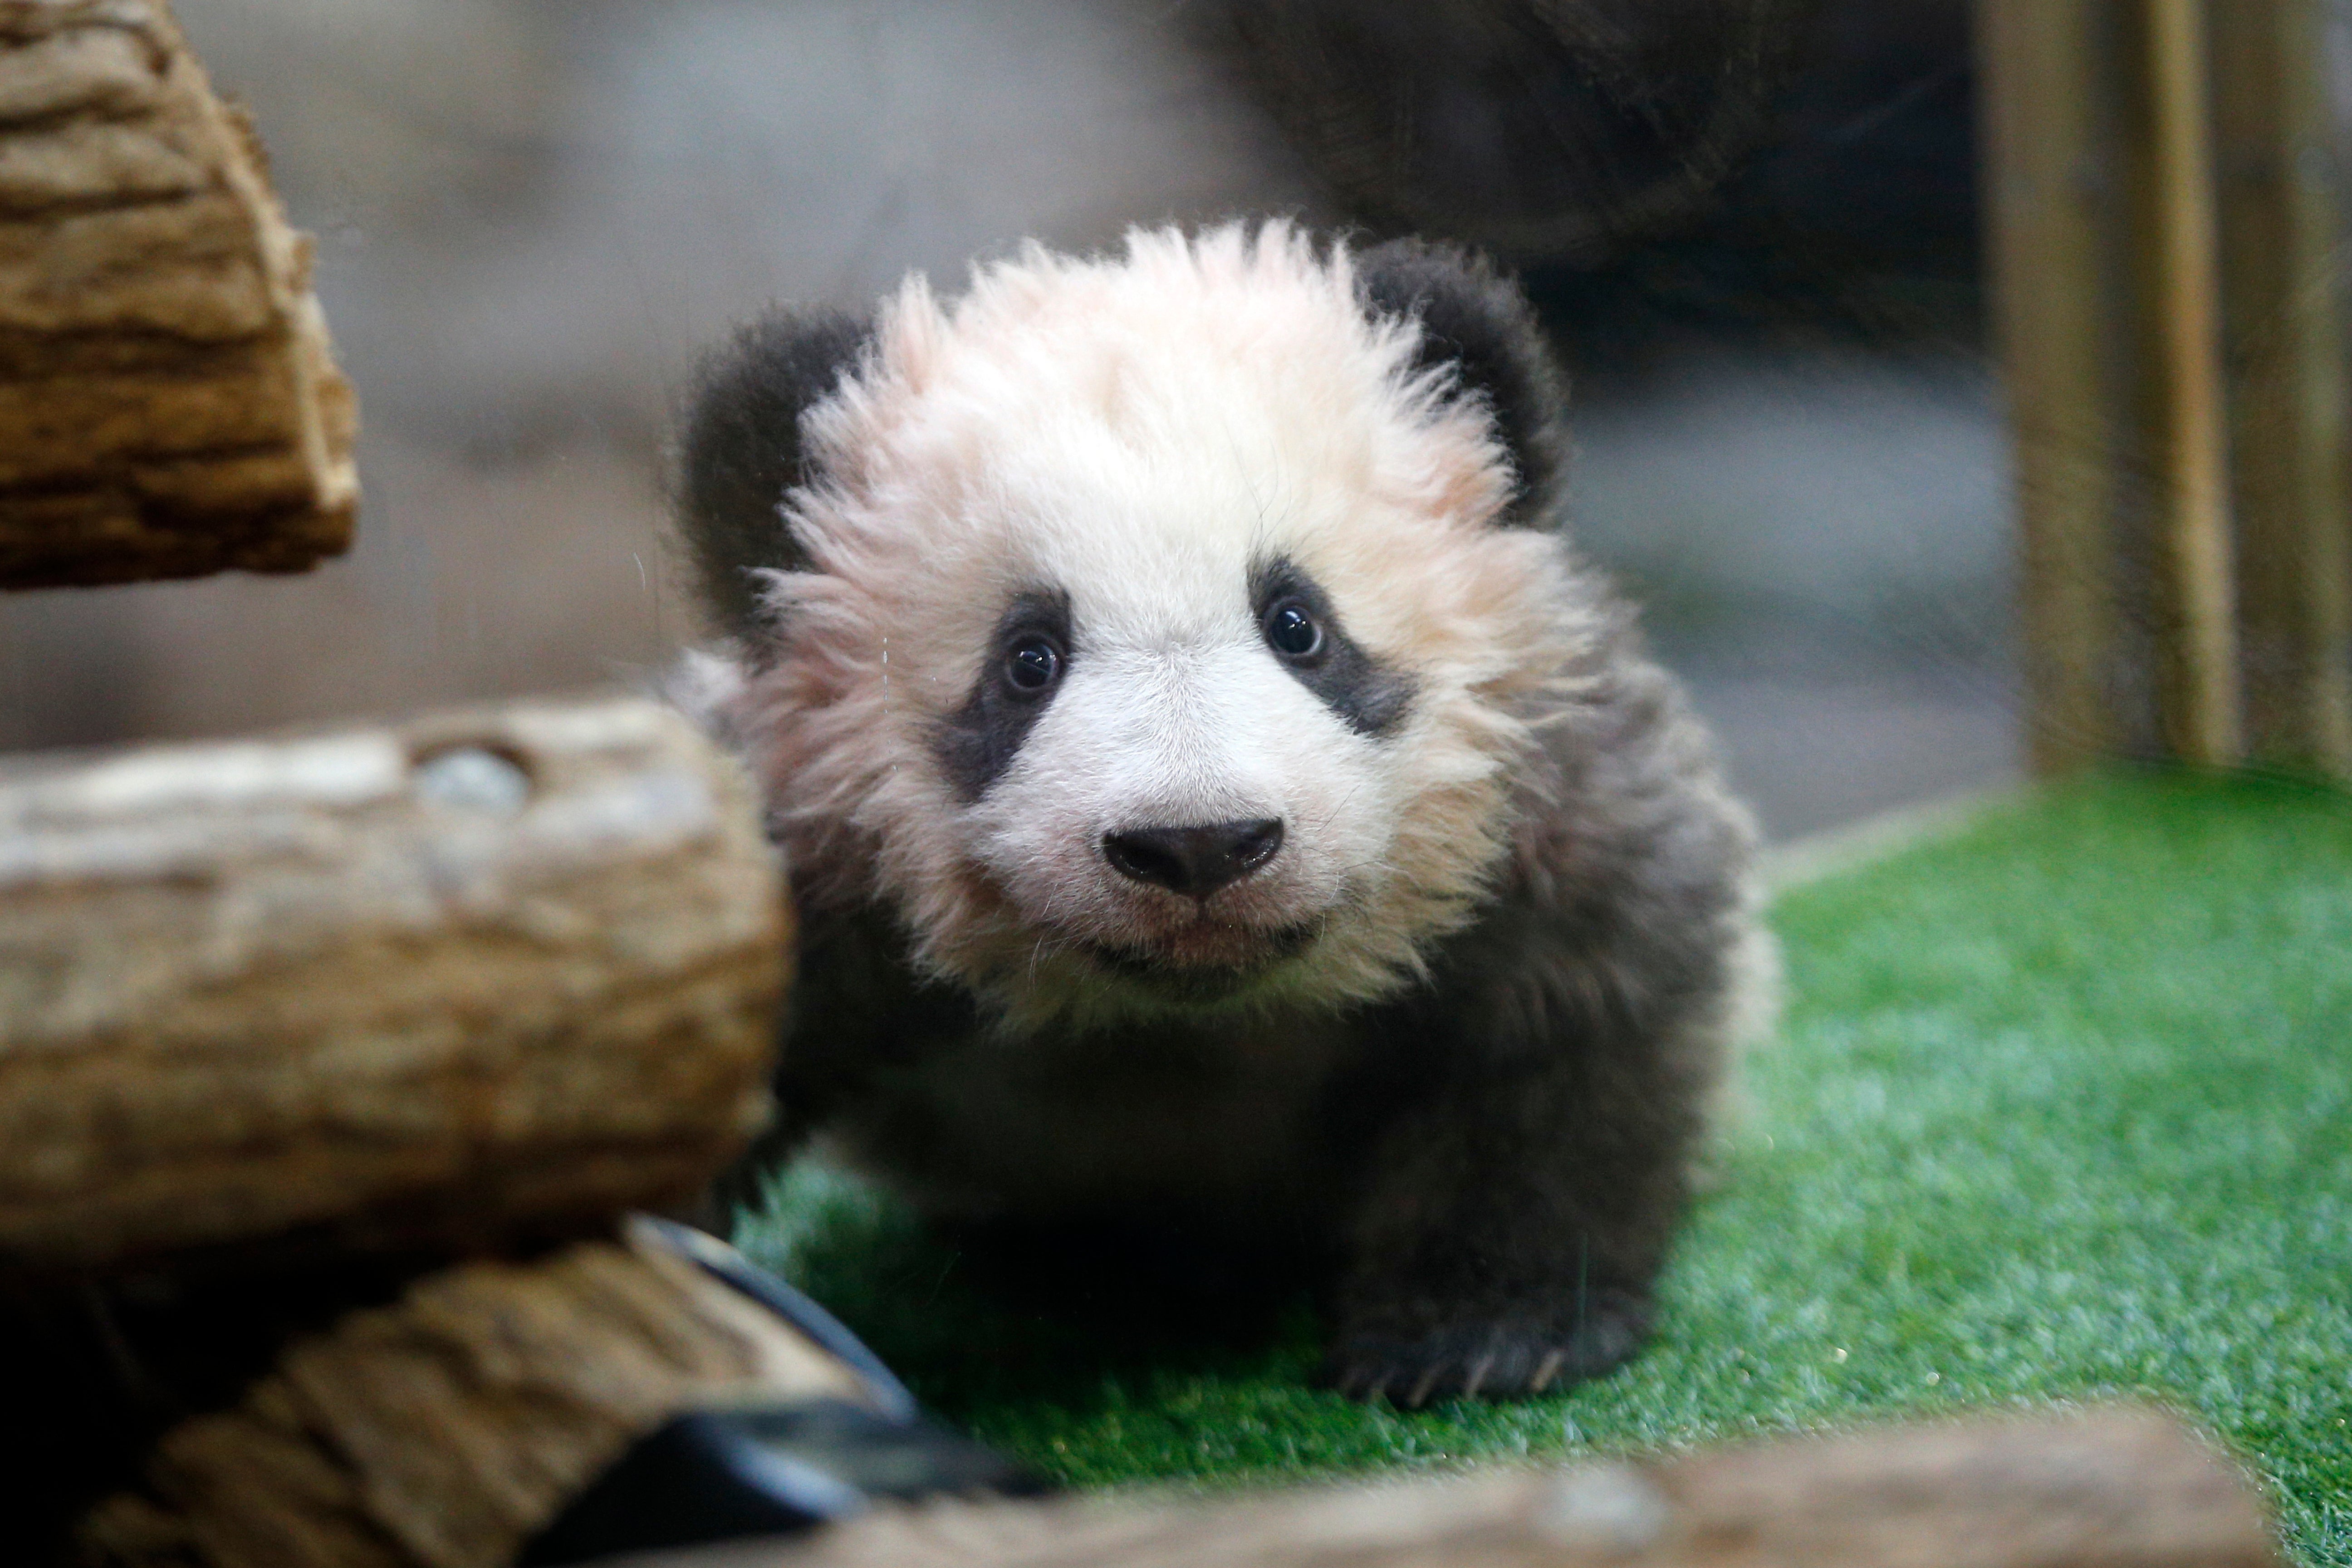 This is what a real panda cub looks like